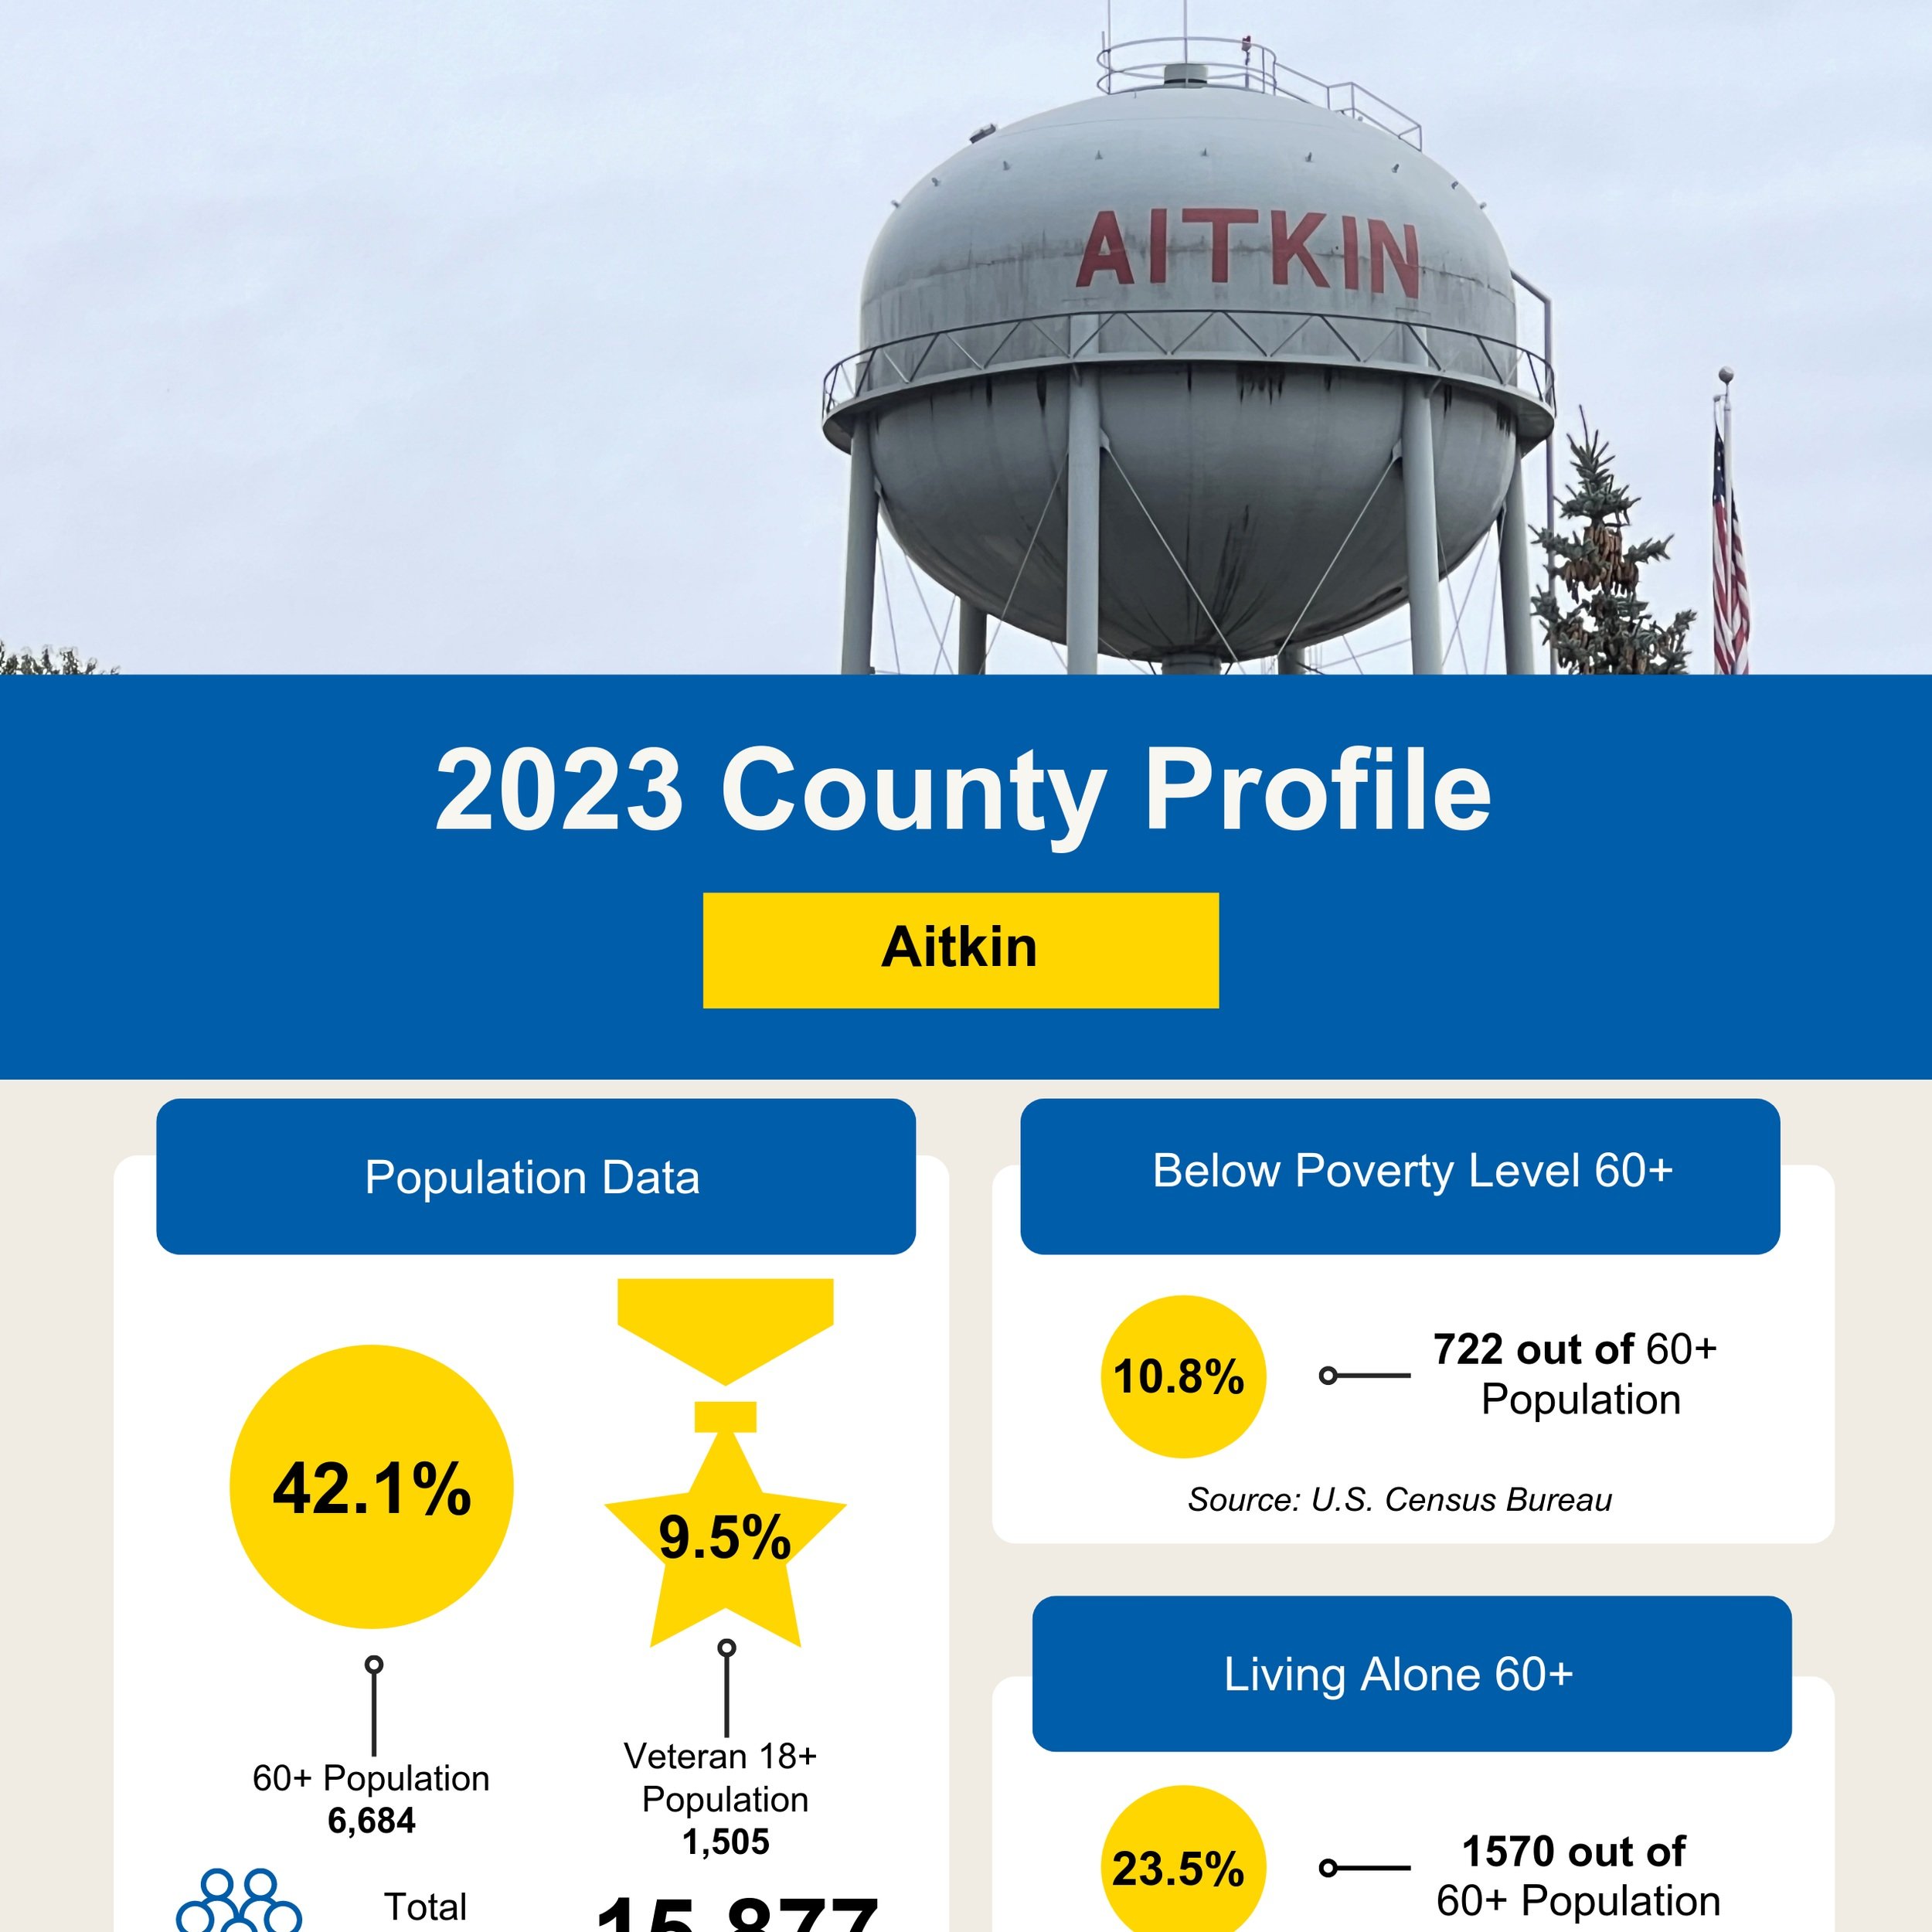 Aitkin County Profile